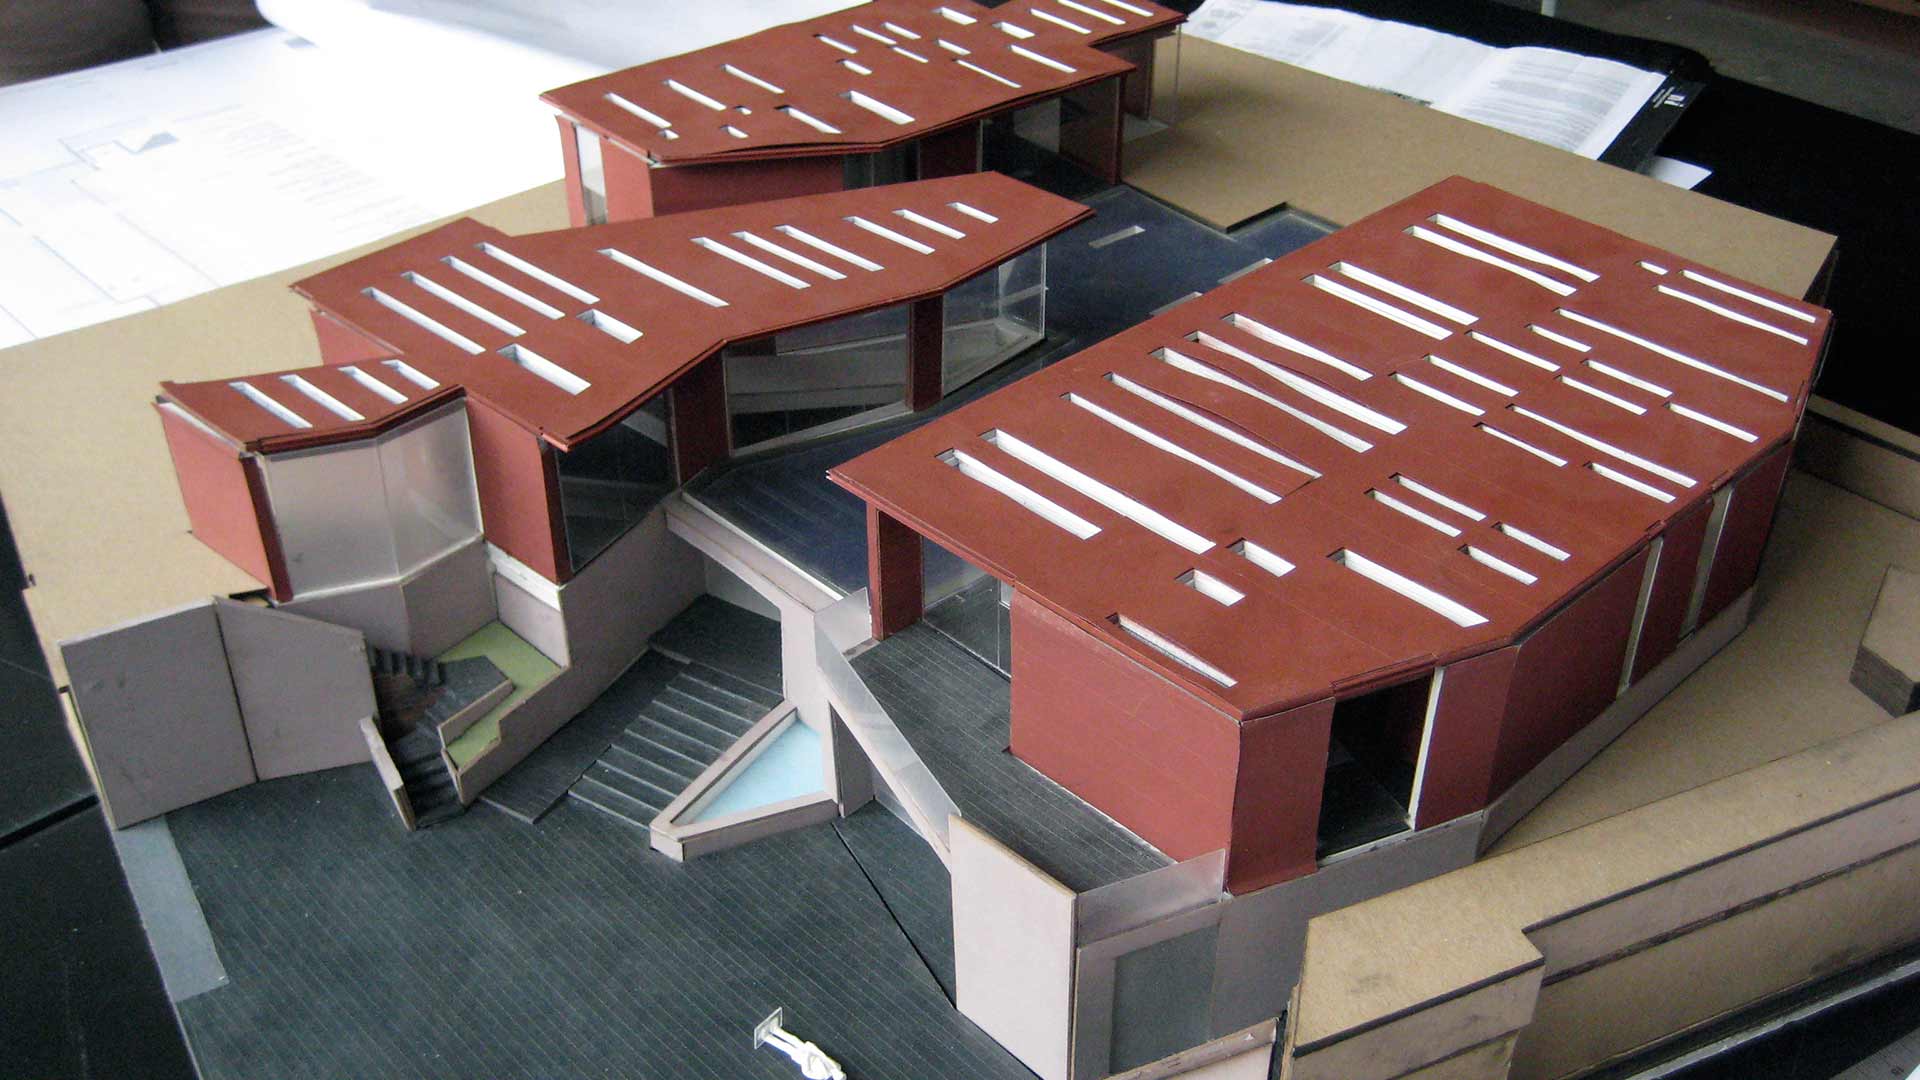 Architect's model of the Daeyang Gallery and House.